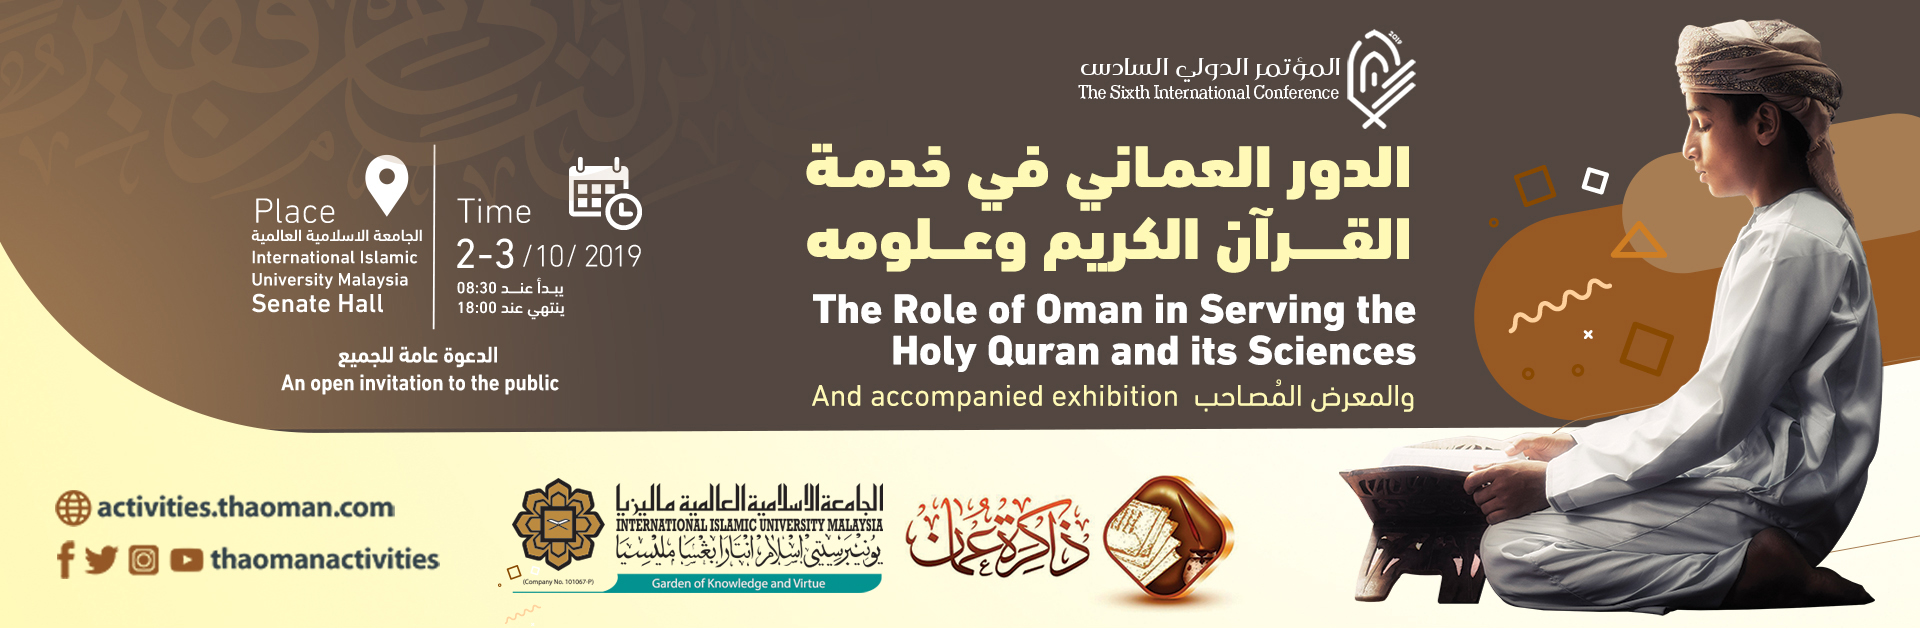 The Role of Oman in Serving the Holy Quran and its sciences